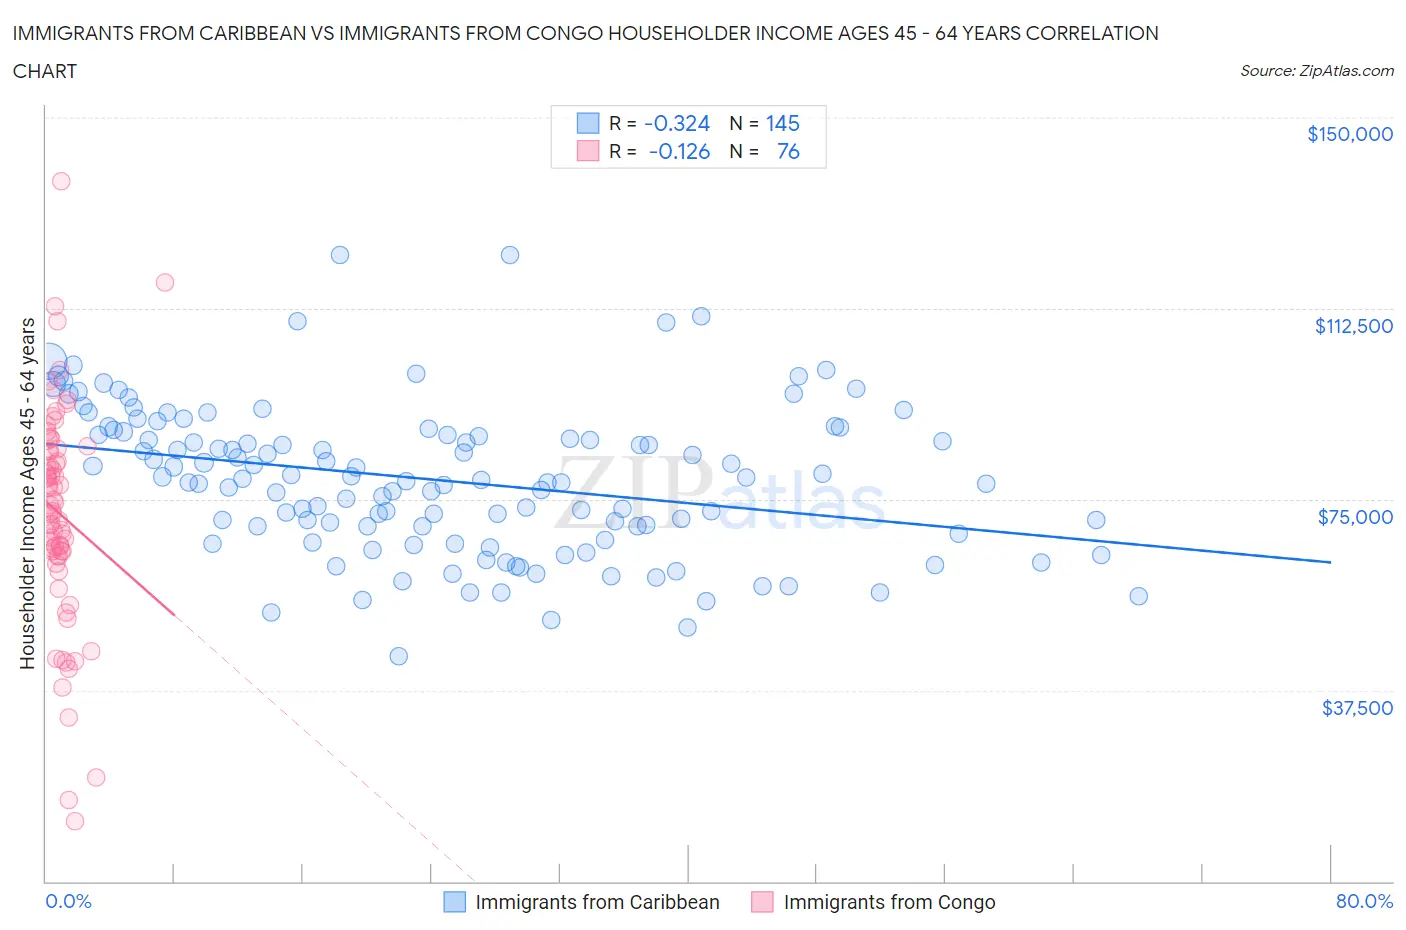 Immigrants from Caribbean vs Immigrants from Congo Householder Income Ages 45 - 64 years